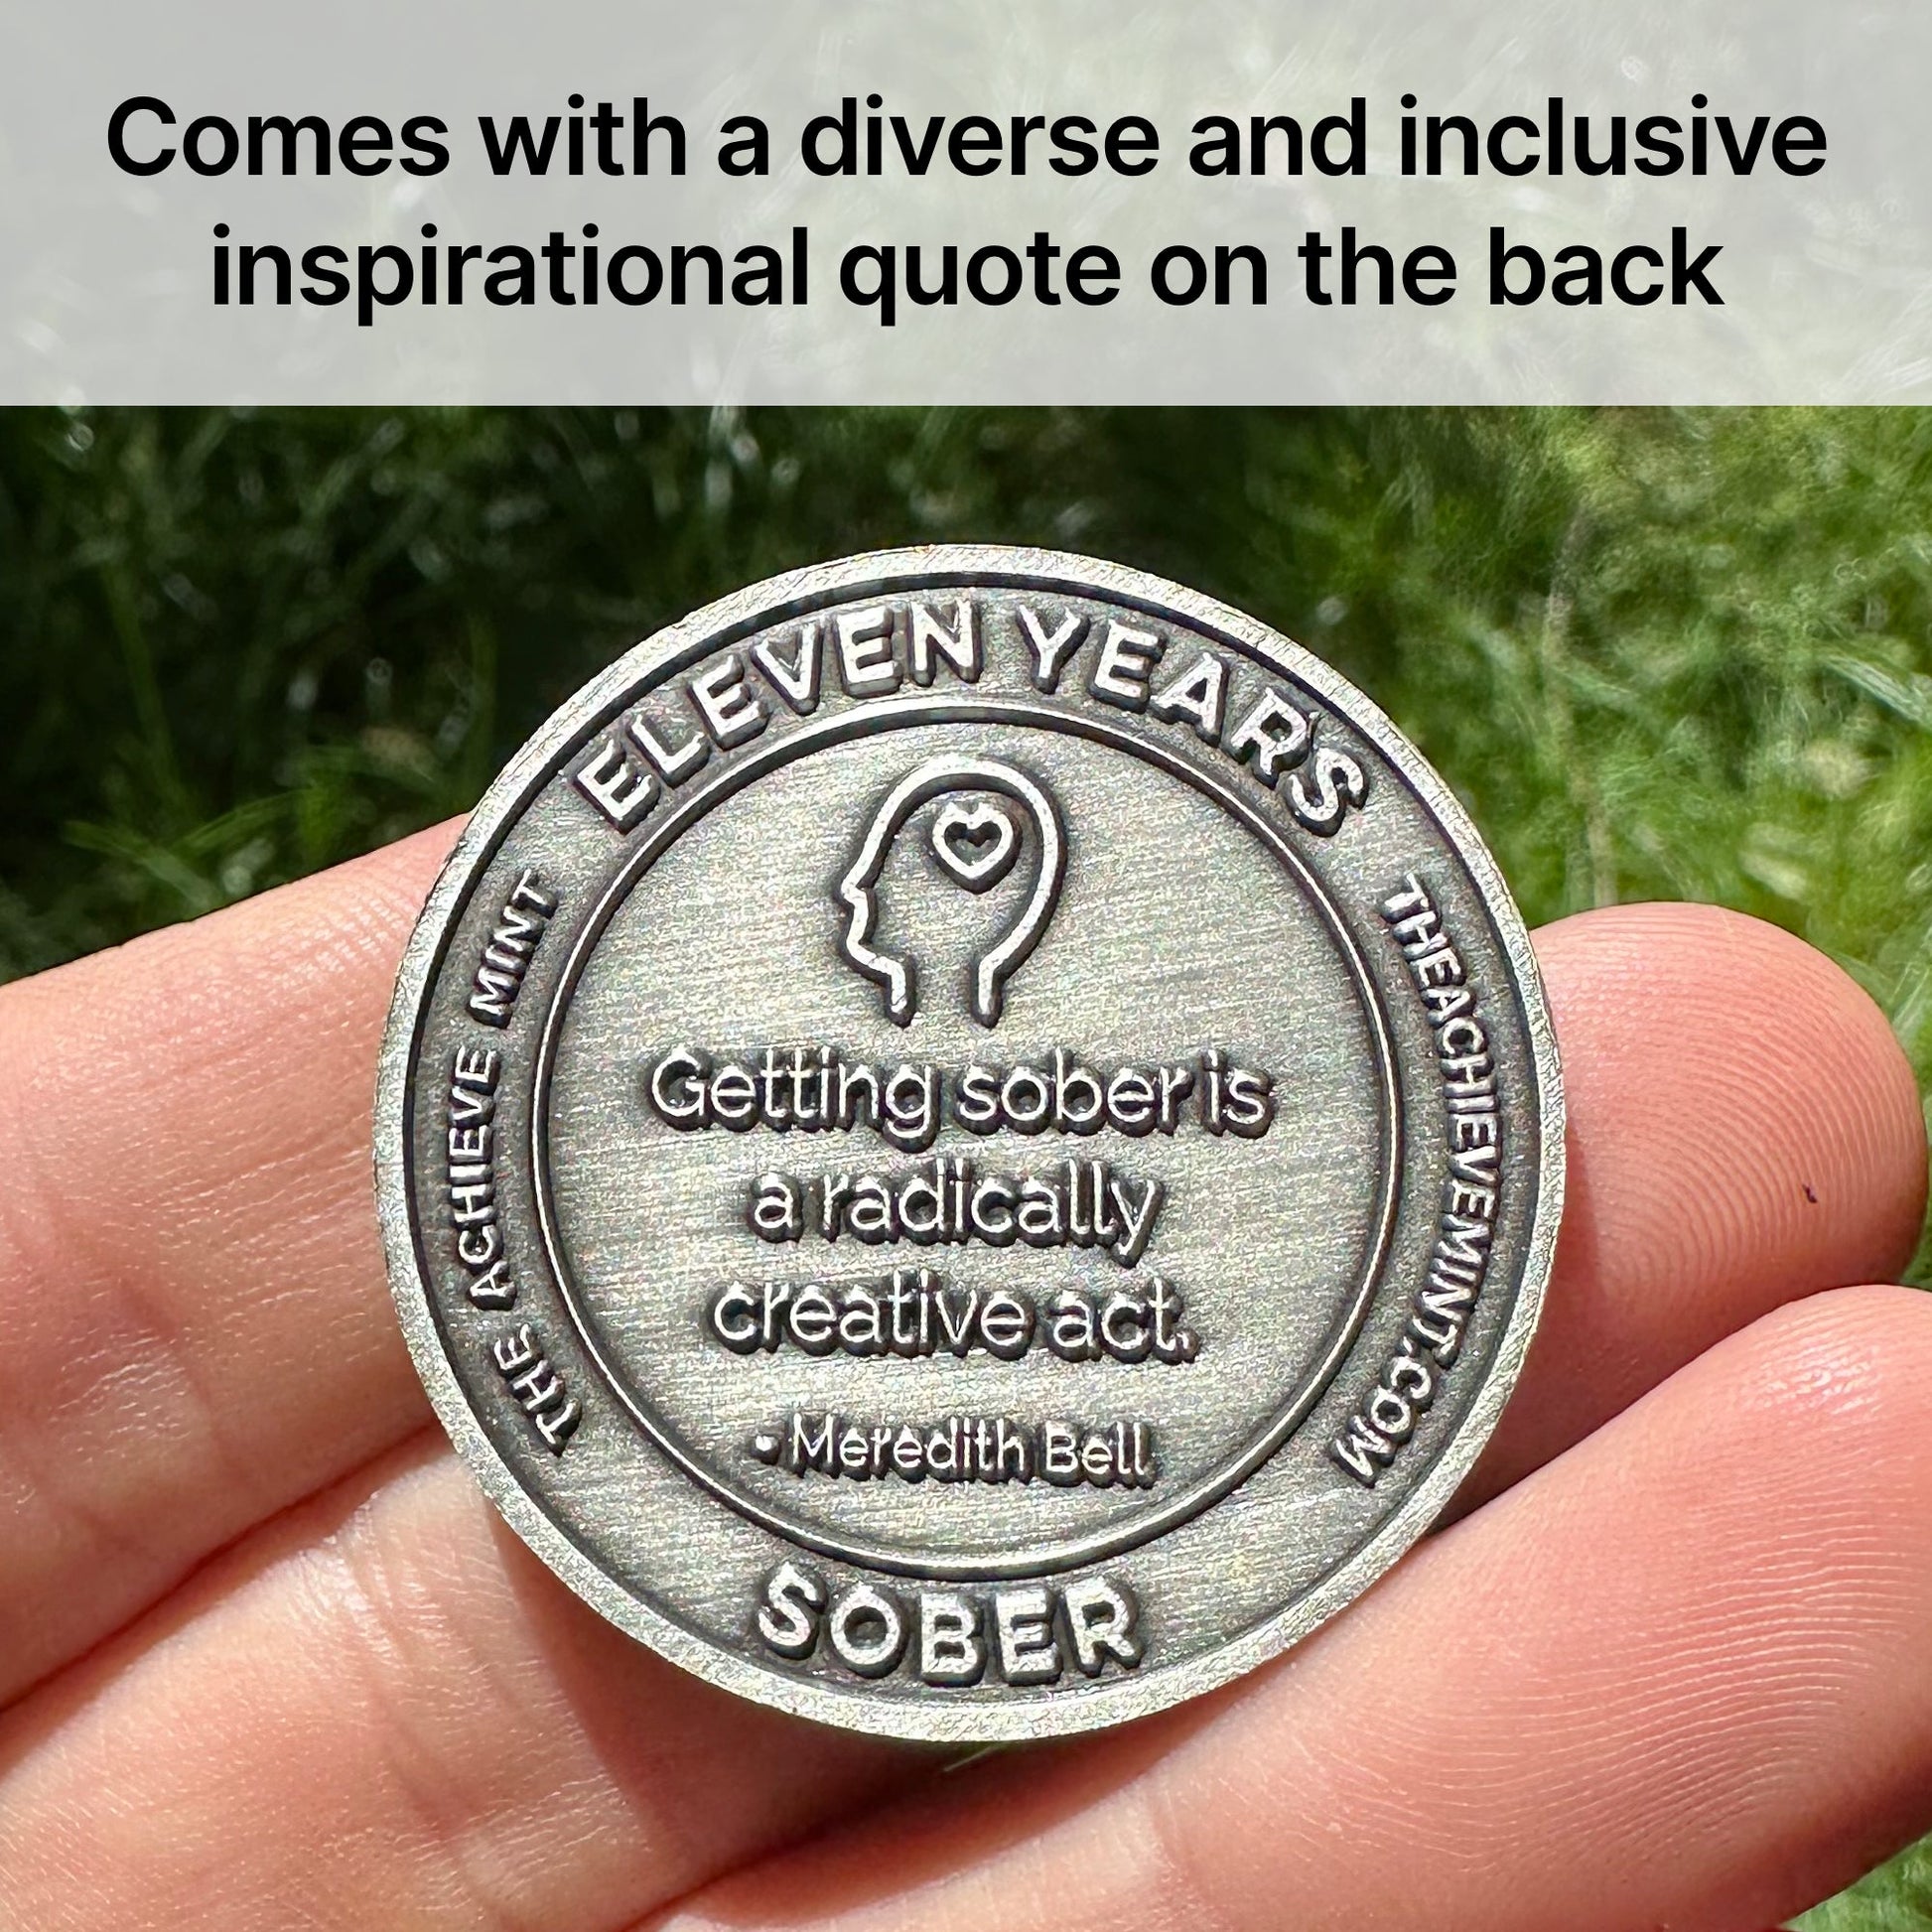 Eleven Years Sober sobriety coin - The Achieve Mint